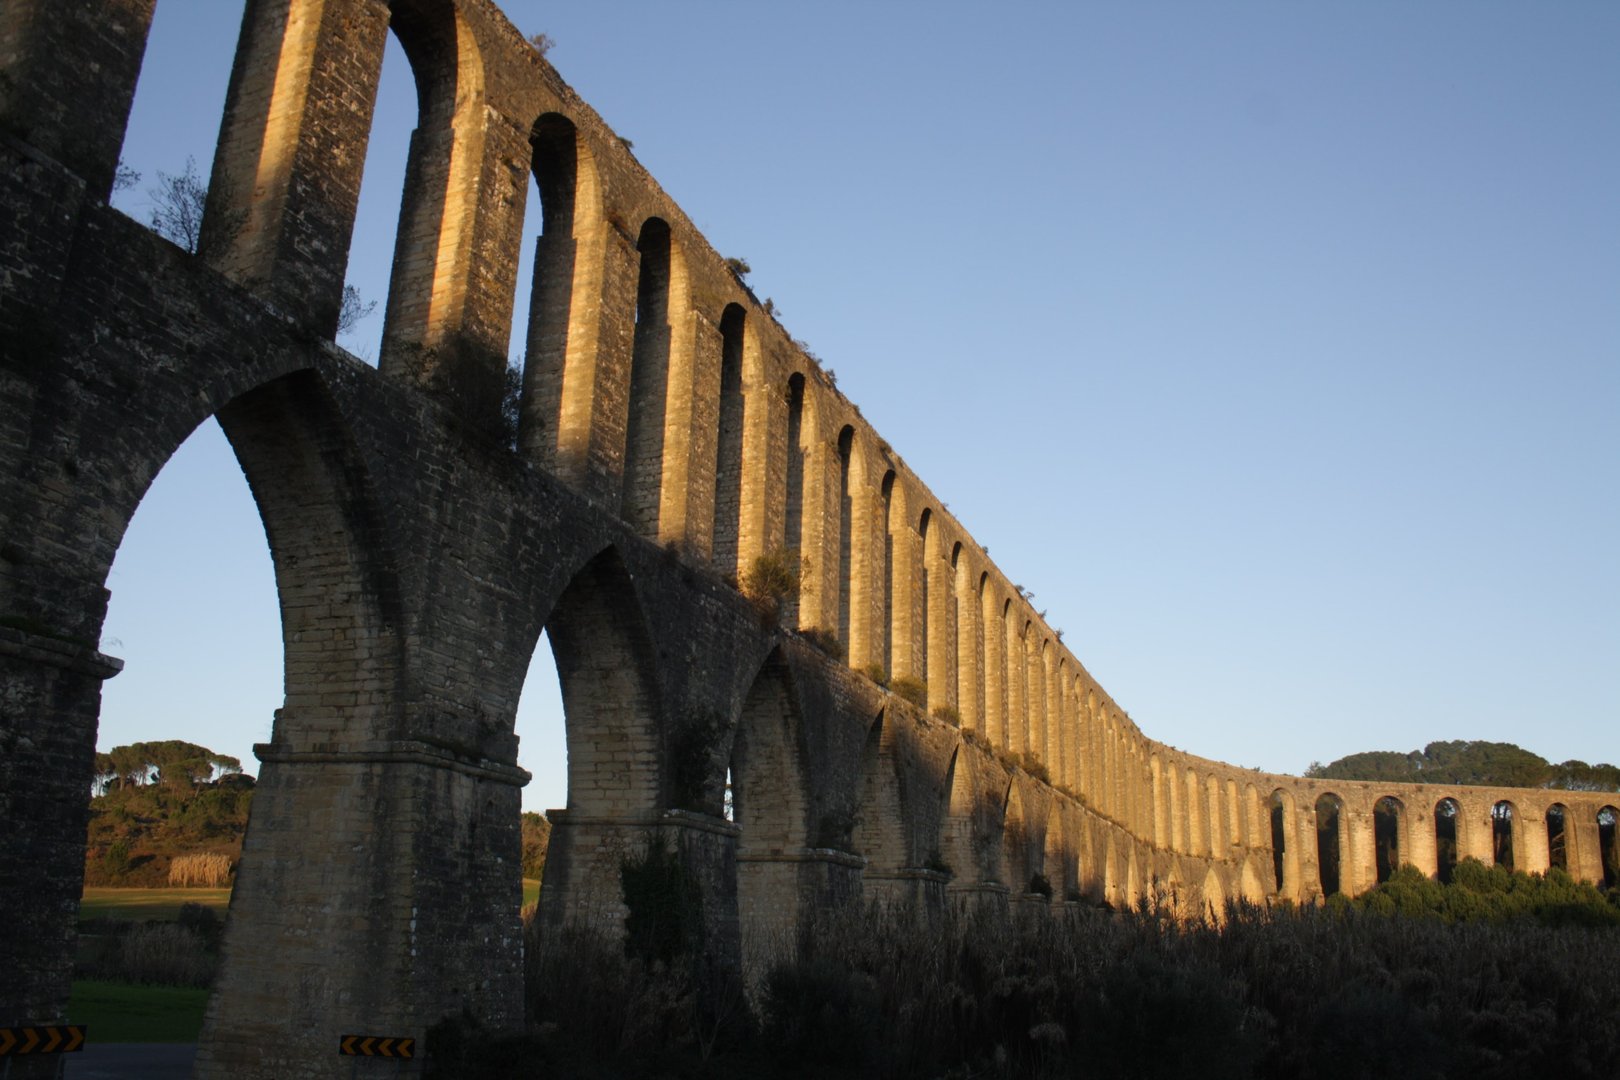 It is made up of a total of 180 round arches and represents one of the most important public works of the 17th century